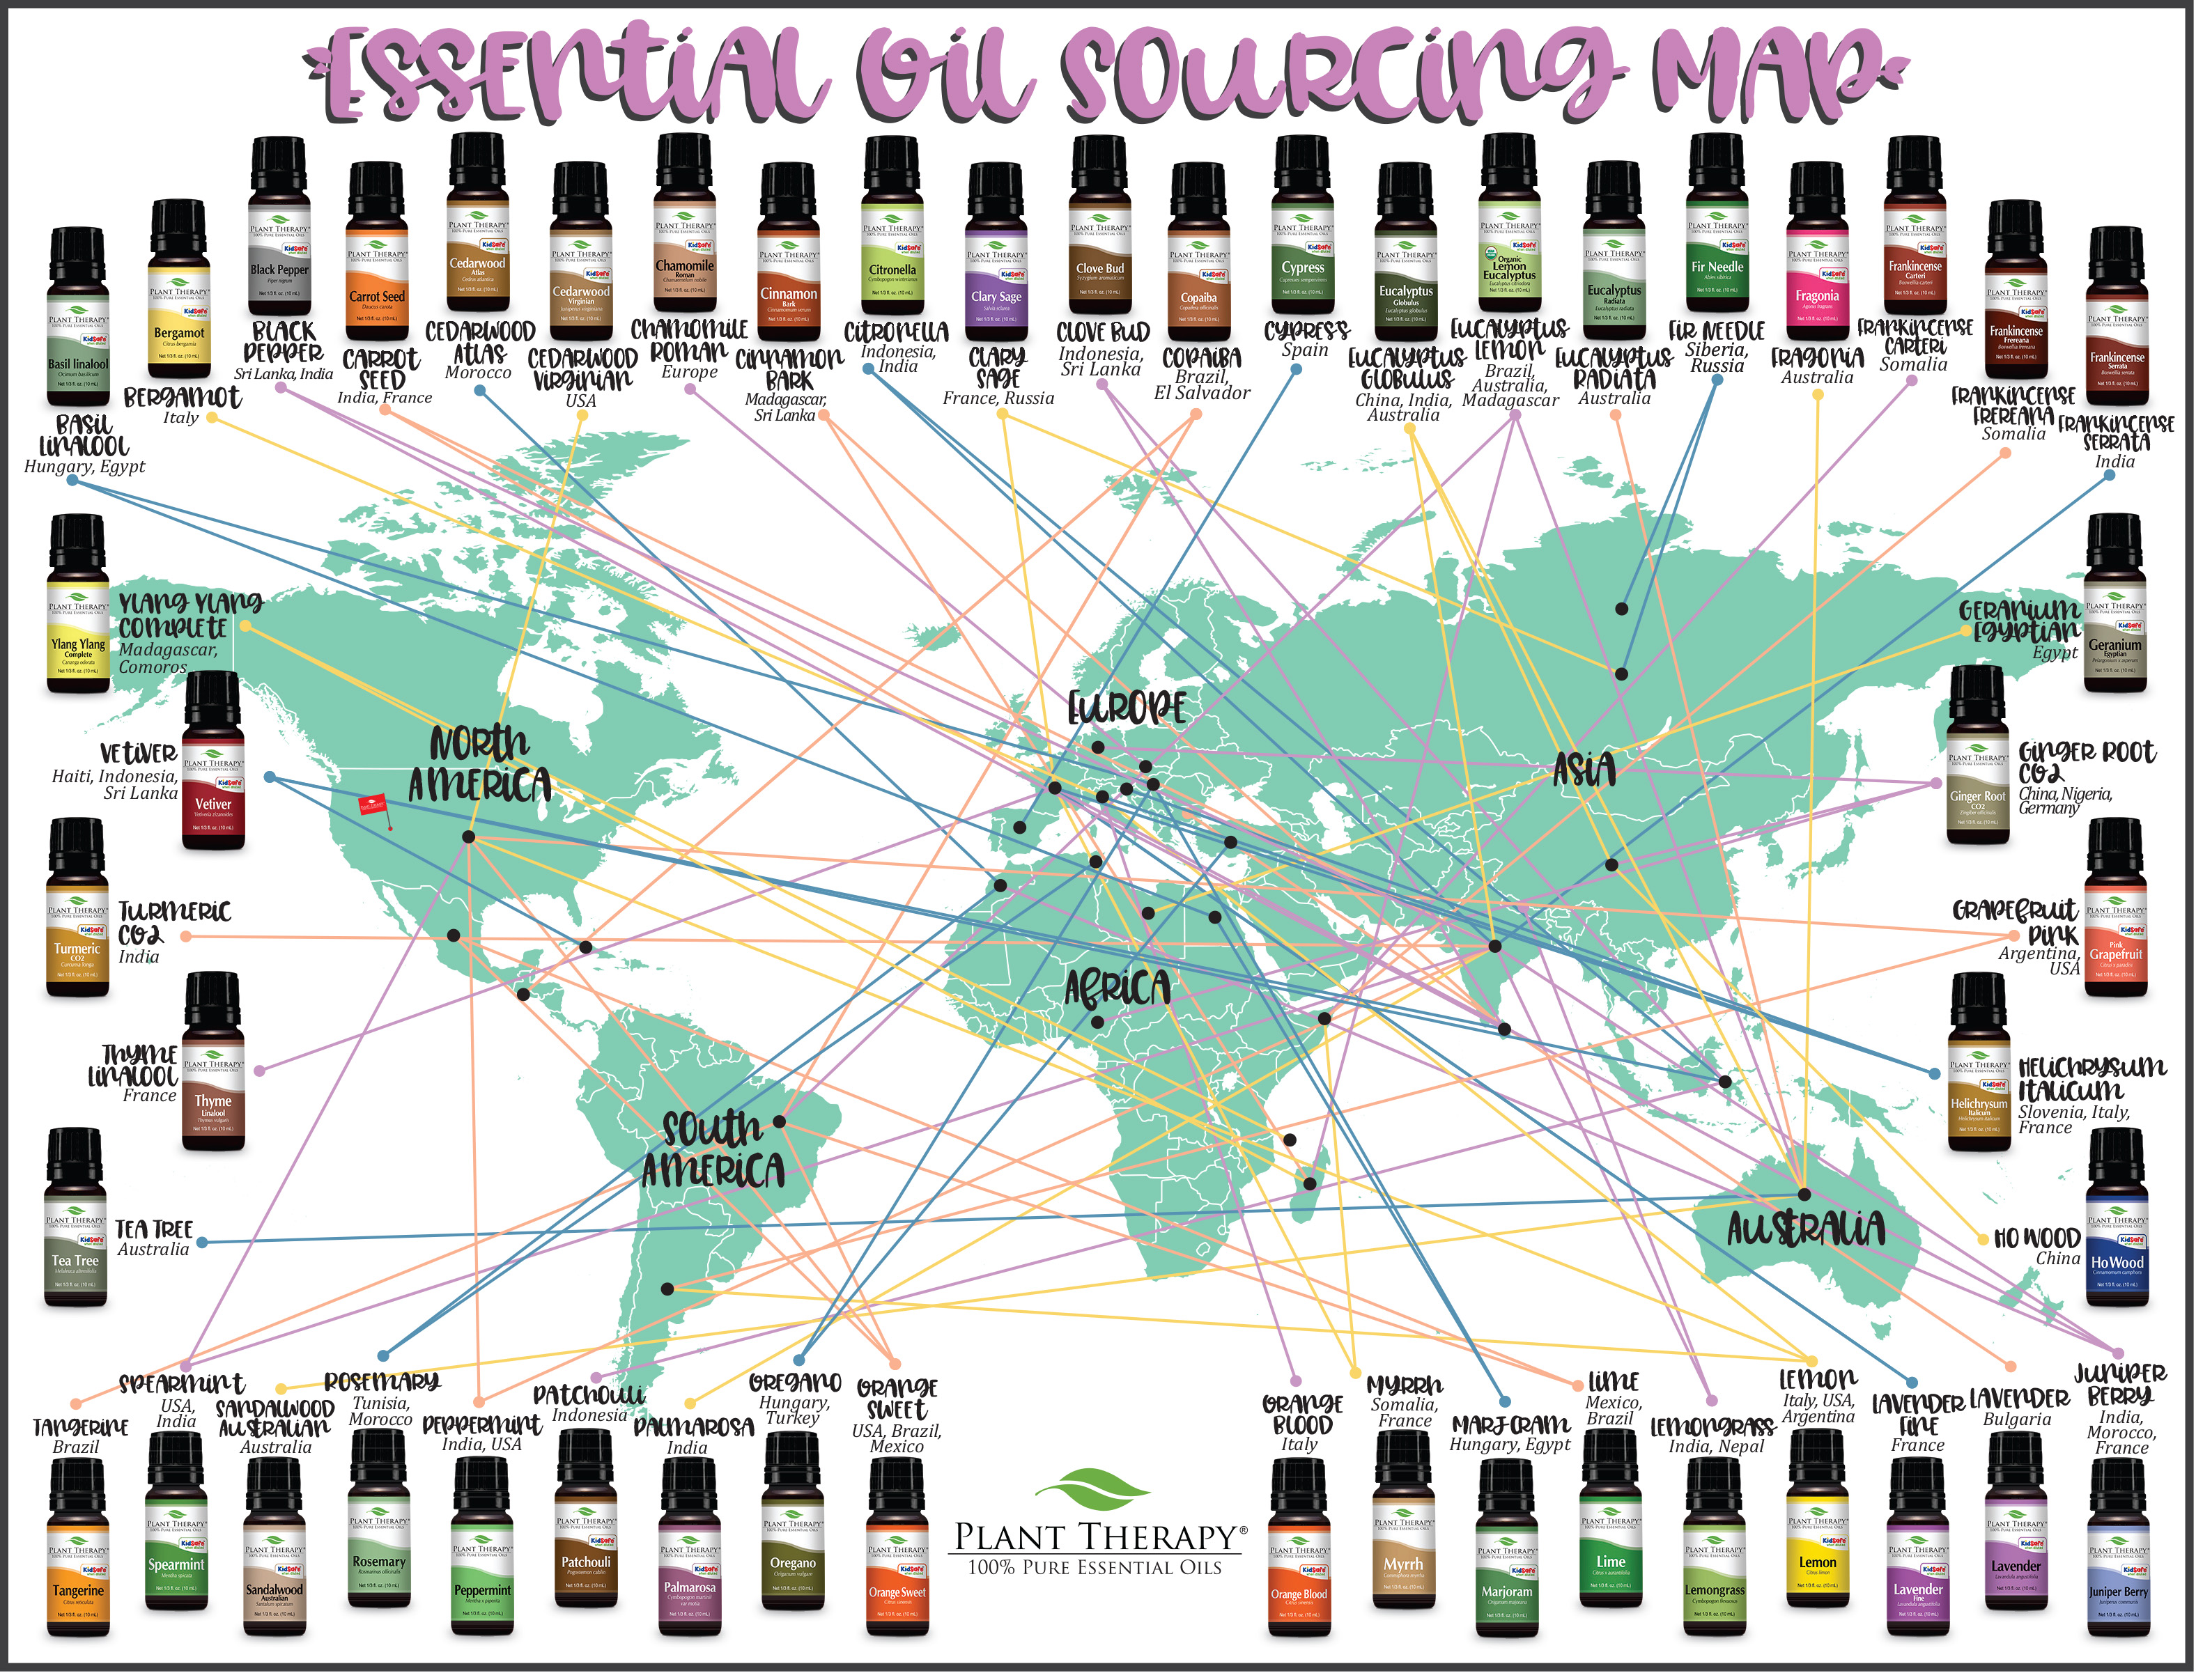 Essential Oil Sourcing Map.jpeg